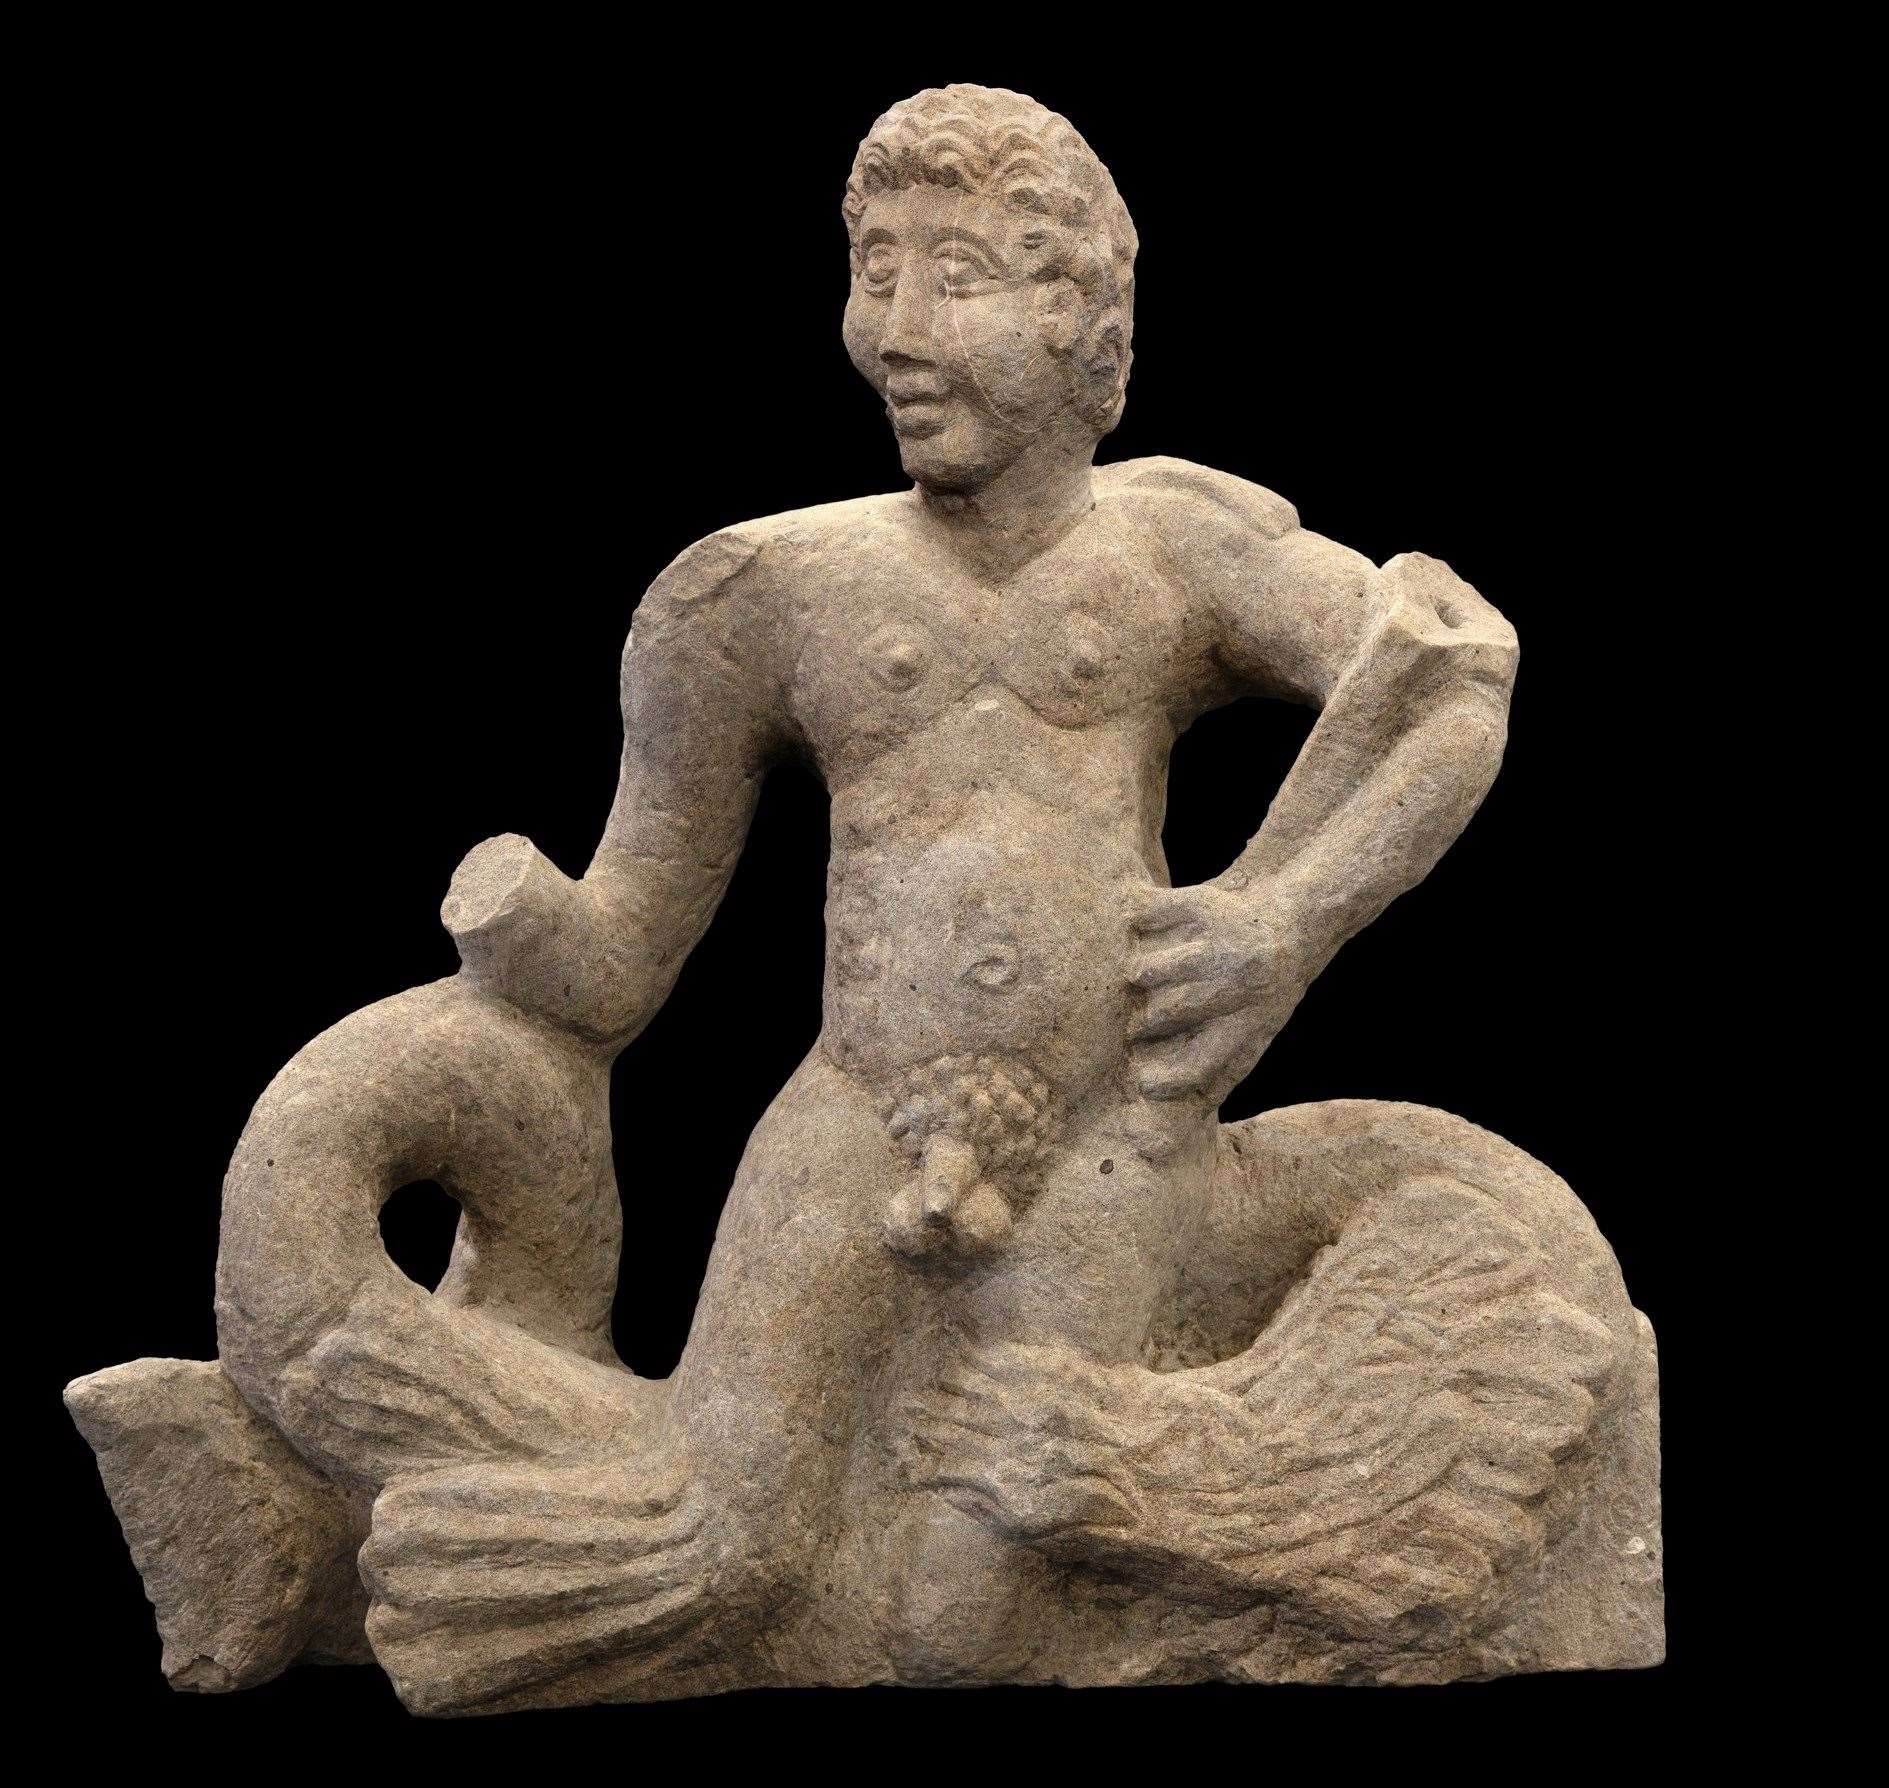 The Roman statue of the sea god, Triton, discovered in Teynham. Picture: CAT